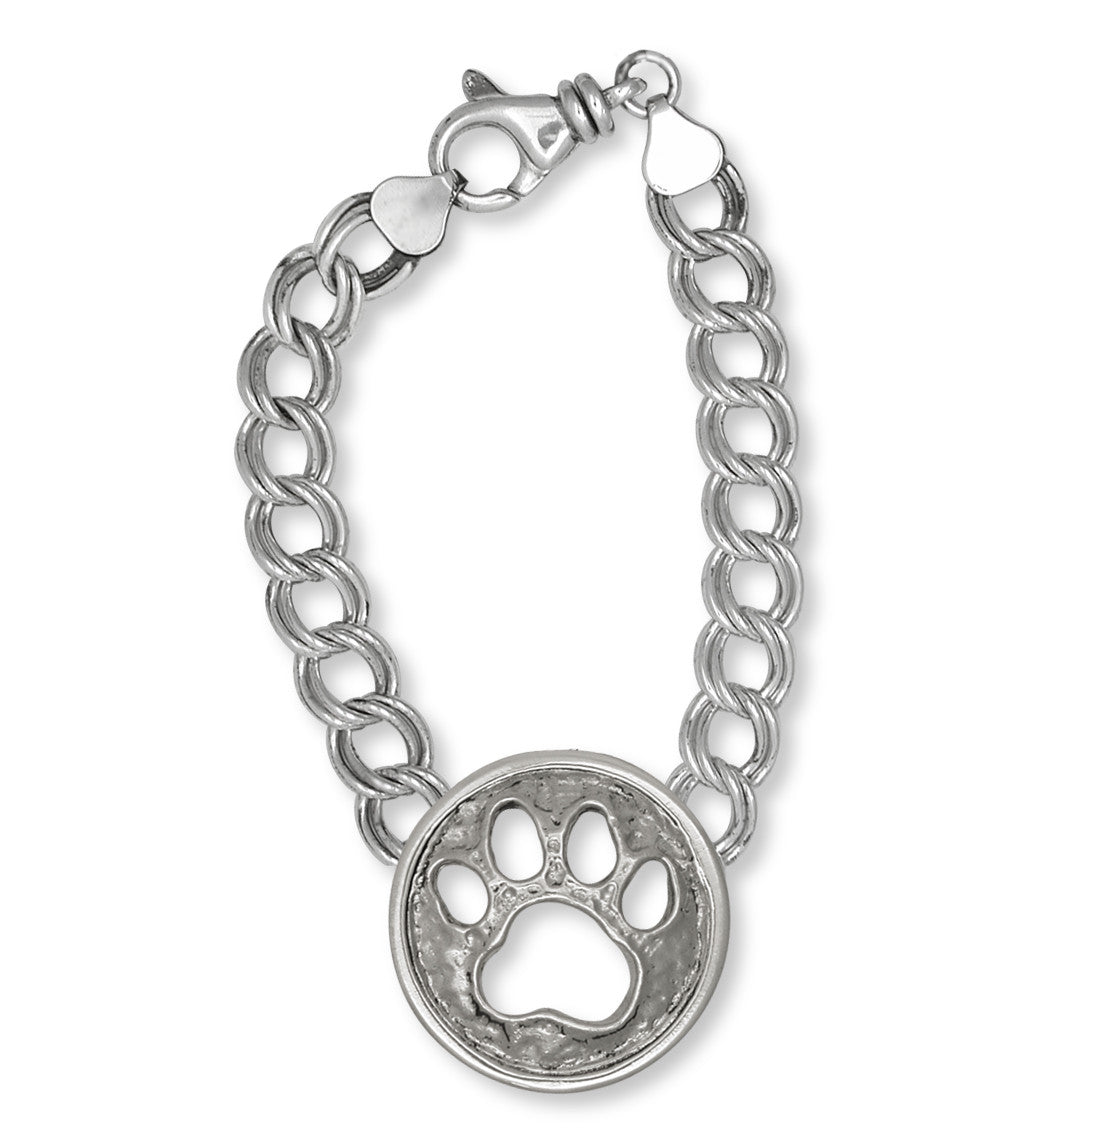 Dog Paw Dog Bracelet Sterling Silver | Esquivel and Fees Handmade Charm and Jewelry Designs